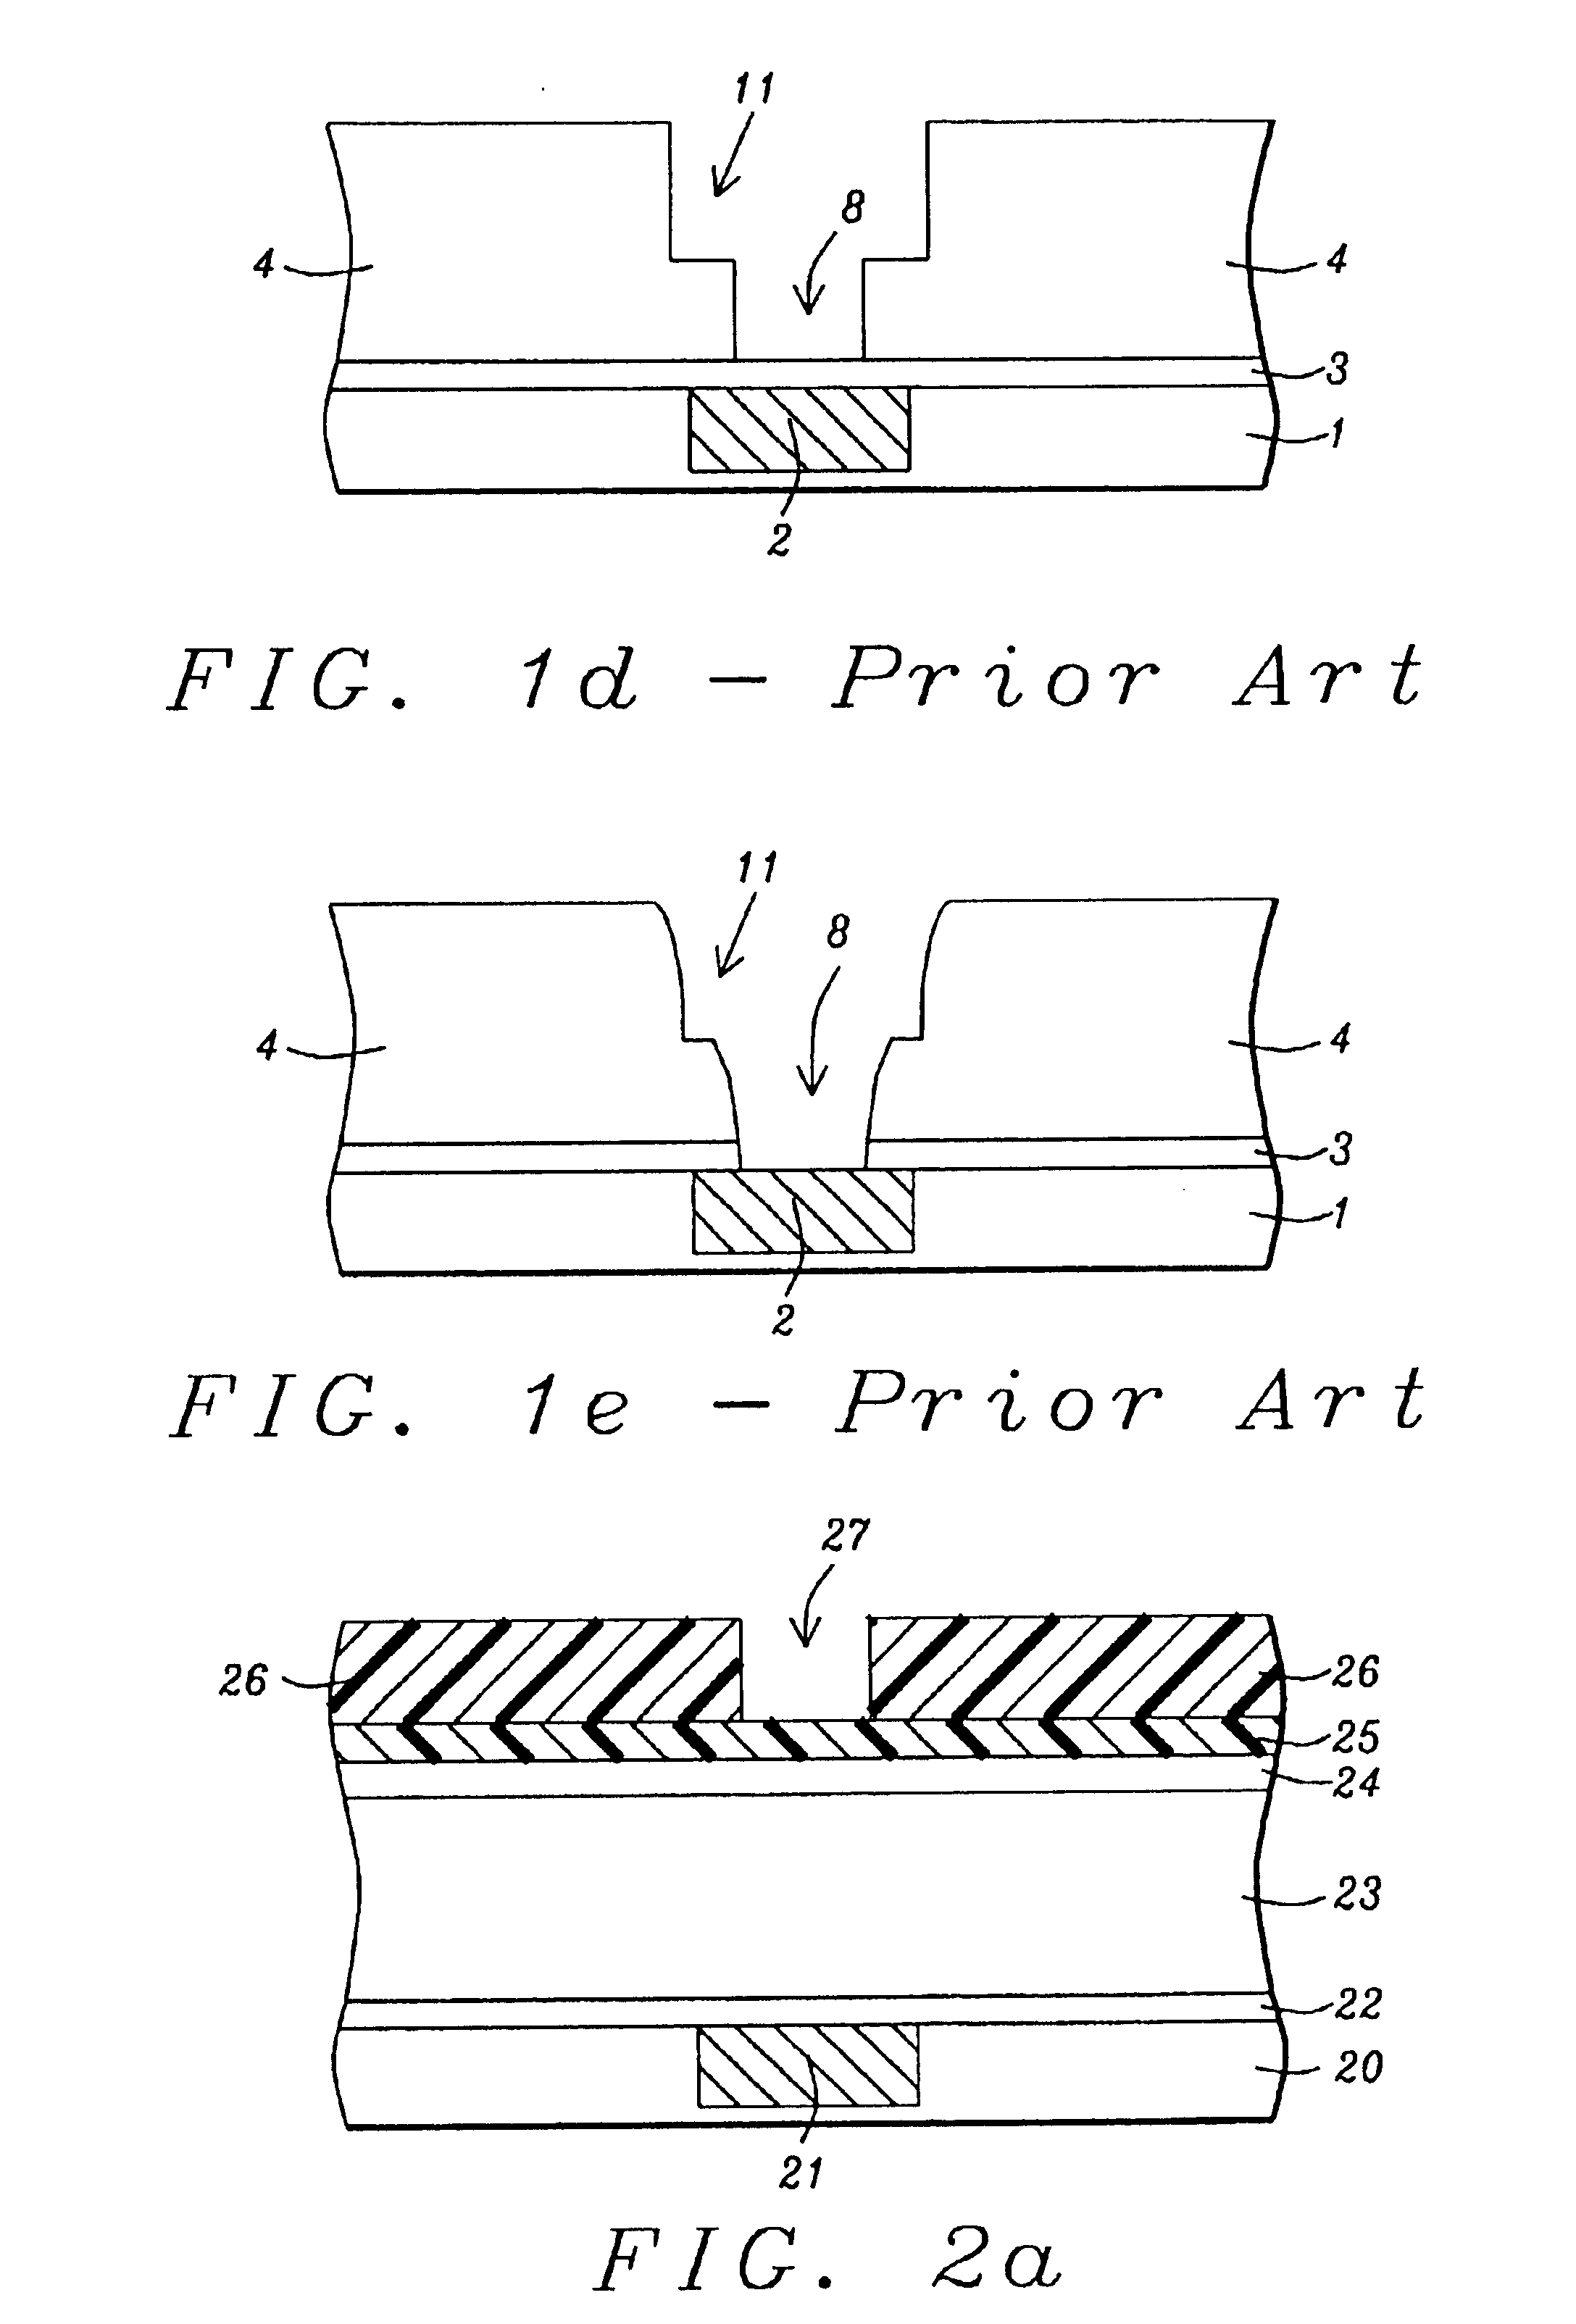 Method to form Cu/OSG dual damascene structure for high performance and reliable interconnects